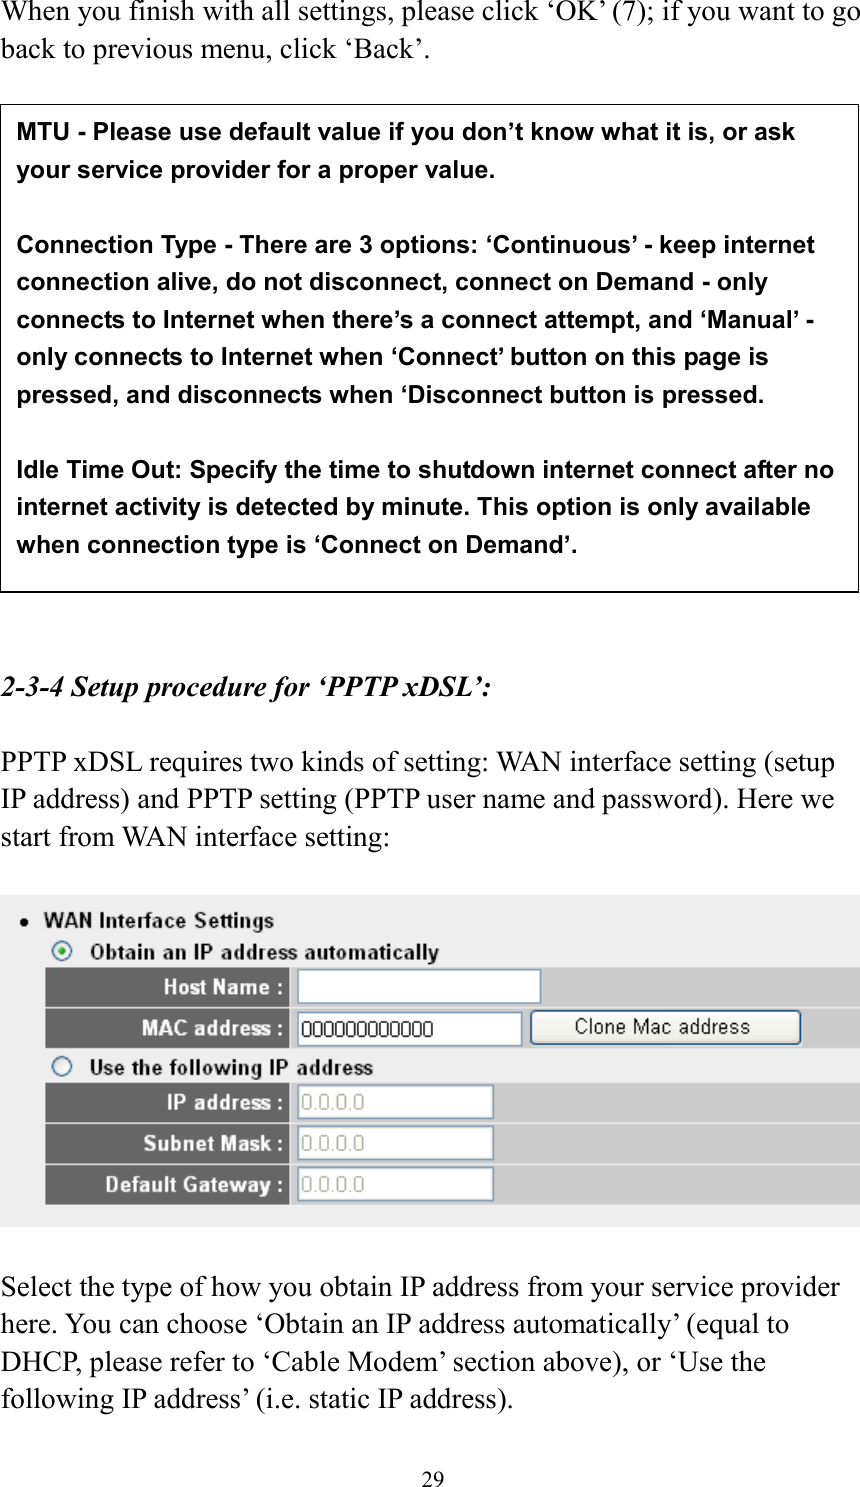 29 When you finish with all settings, please click ‘OK’ (7); if you want to go back to previous menu, click ‘Back’.                   2-3-4 Setup procedure for ‘PPTP xDSL’:  PPTP xDSL requires two kinds of setting: WAN interface setting (setup IP address) and PPTP setting (PPTP user name and password). Here we start from WAN interface setting:    Select the type of how you obtain IP address from your service provider here. You can choose ‘Obtain an IP address automatically’ (equal to DHCP, please refer to ‘Cable Modem’ section above), or ‘Use the following IP address’ (i.e. static IP address).   MTU - Please use default value if you don’t know what it is, or ask your service provider for a proper value.  Connection Type - There are 3 options: ‘Continuous’ - keep internet connection alive, do not disconnect, connect on Demand - only connects to Internet when there’s a connect attempt, and ‘Manual’ - only connects to Internet when ‘Connect’ button on this page is pressed, and disconnects when ‘Disconnect button is pressed.  Idle Time Out: Specify the time to shutdown internet connect after no internet activity is detected by minute. This option is only available when connection type is ‘Connect on Demand’. 